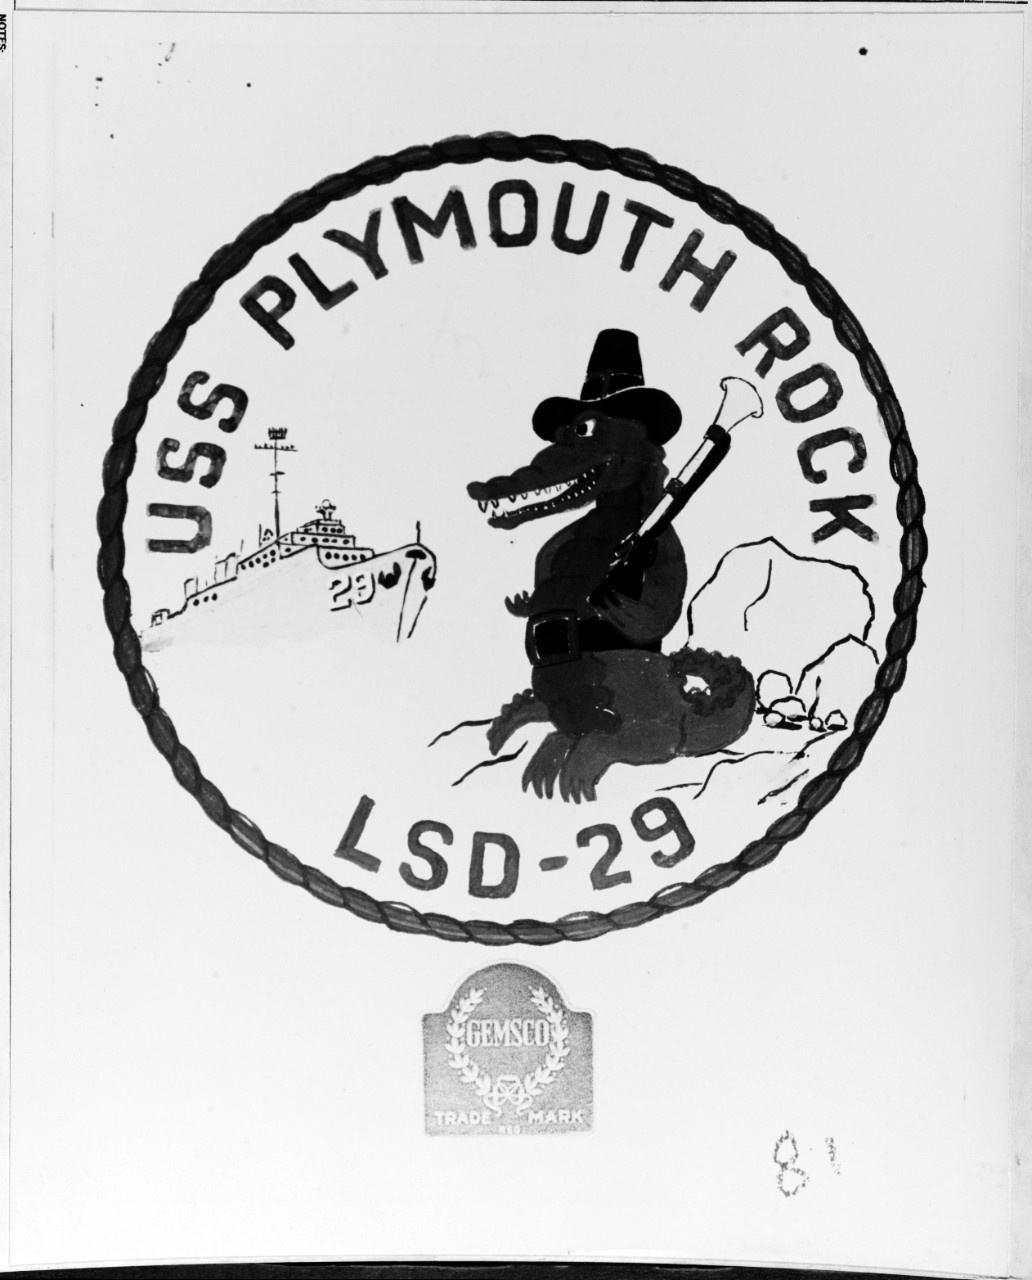 Photo #: NH 64706-KN Insignia of USS Plymouth Rock (LDS-29)